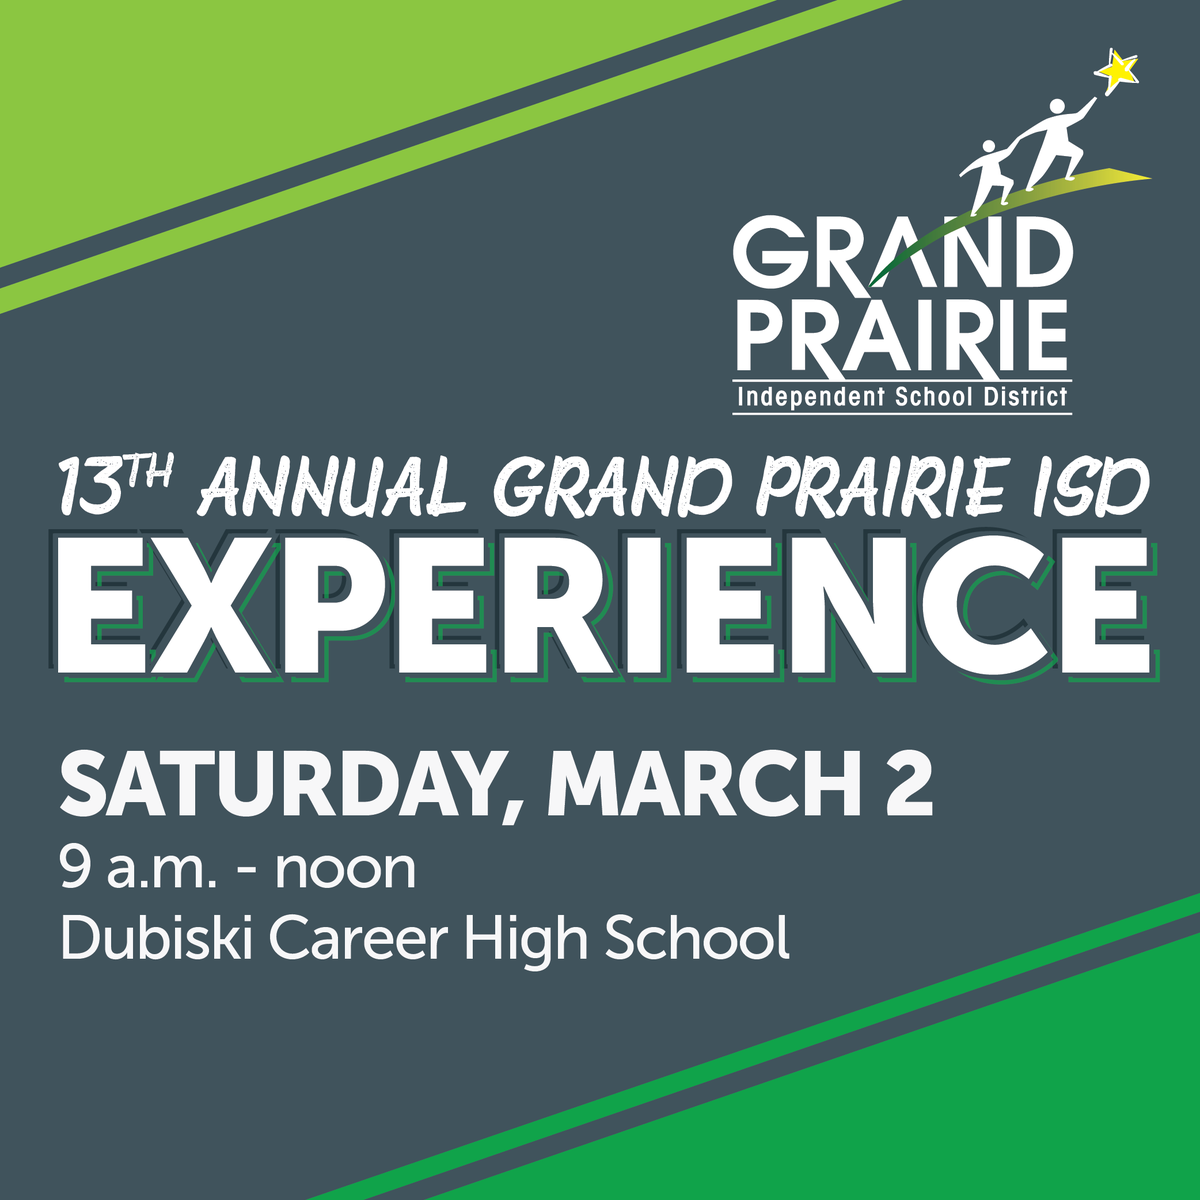 Save the Date for the 13th Annual GPISD Experience! Discover a kaleidoscope of educational possibilities and find a school as unique as your child. Sat., March 2, 9am-12pm at Dubiski Career High School. For more details, you can visit gpisd.org/Experience. #GPISDExperience